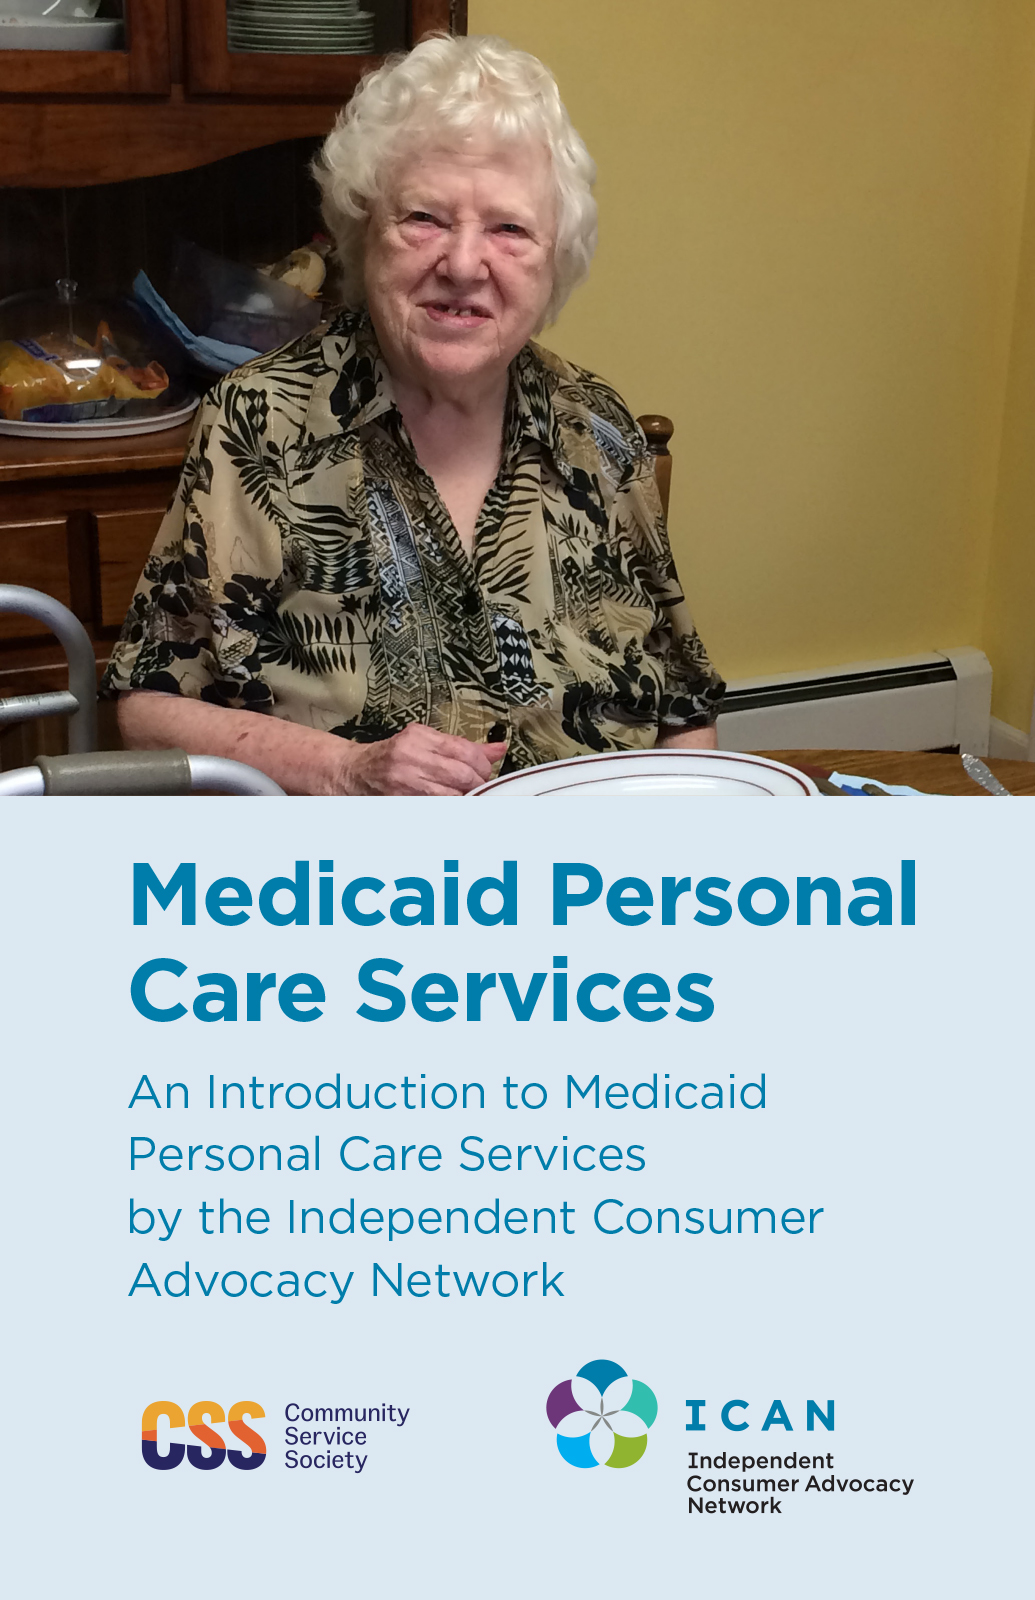 Cover of Medicaid Personal Care Services brochure